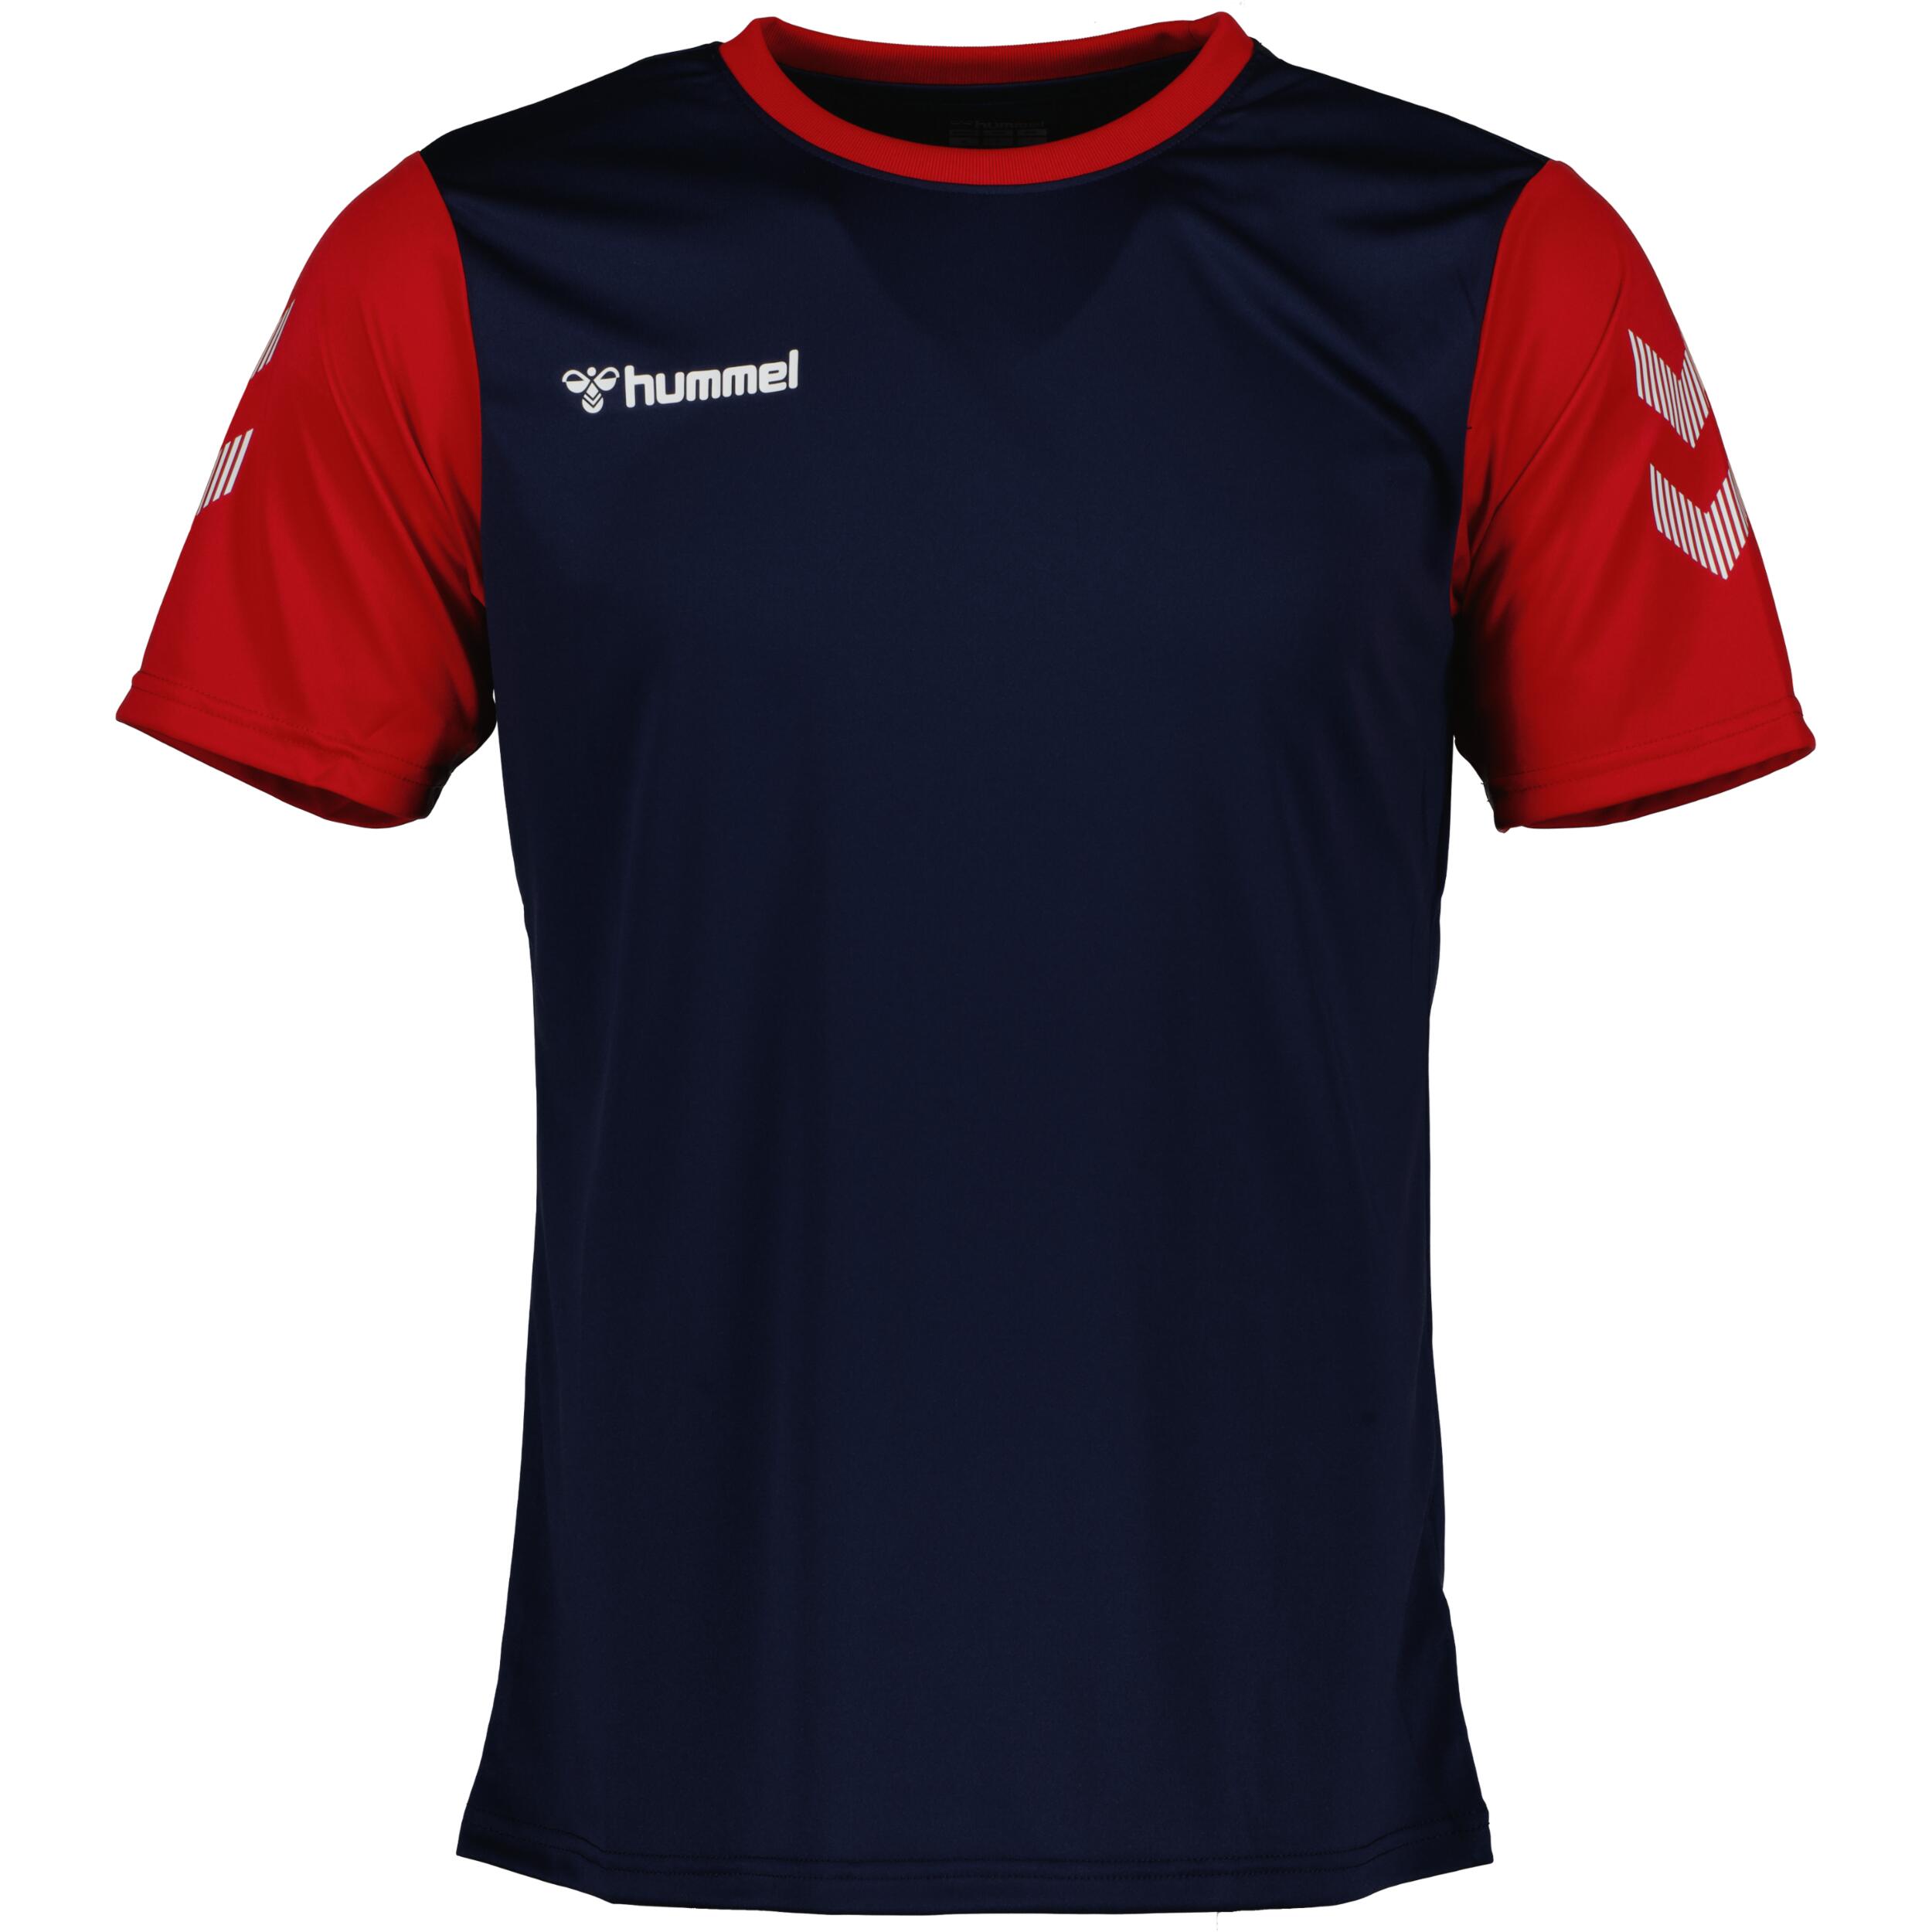 HUMMEL Match jersey for kids, great for football, in marine/red